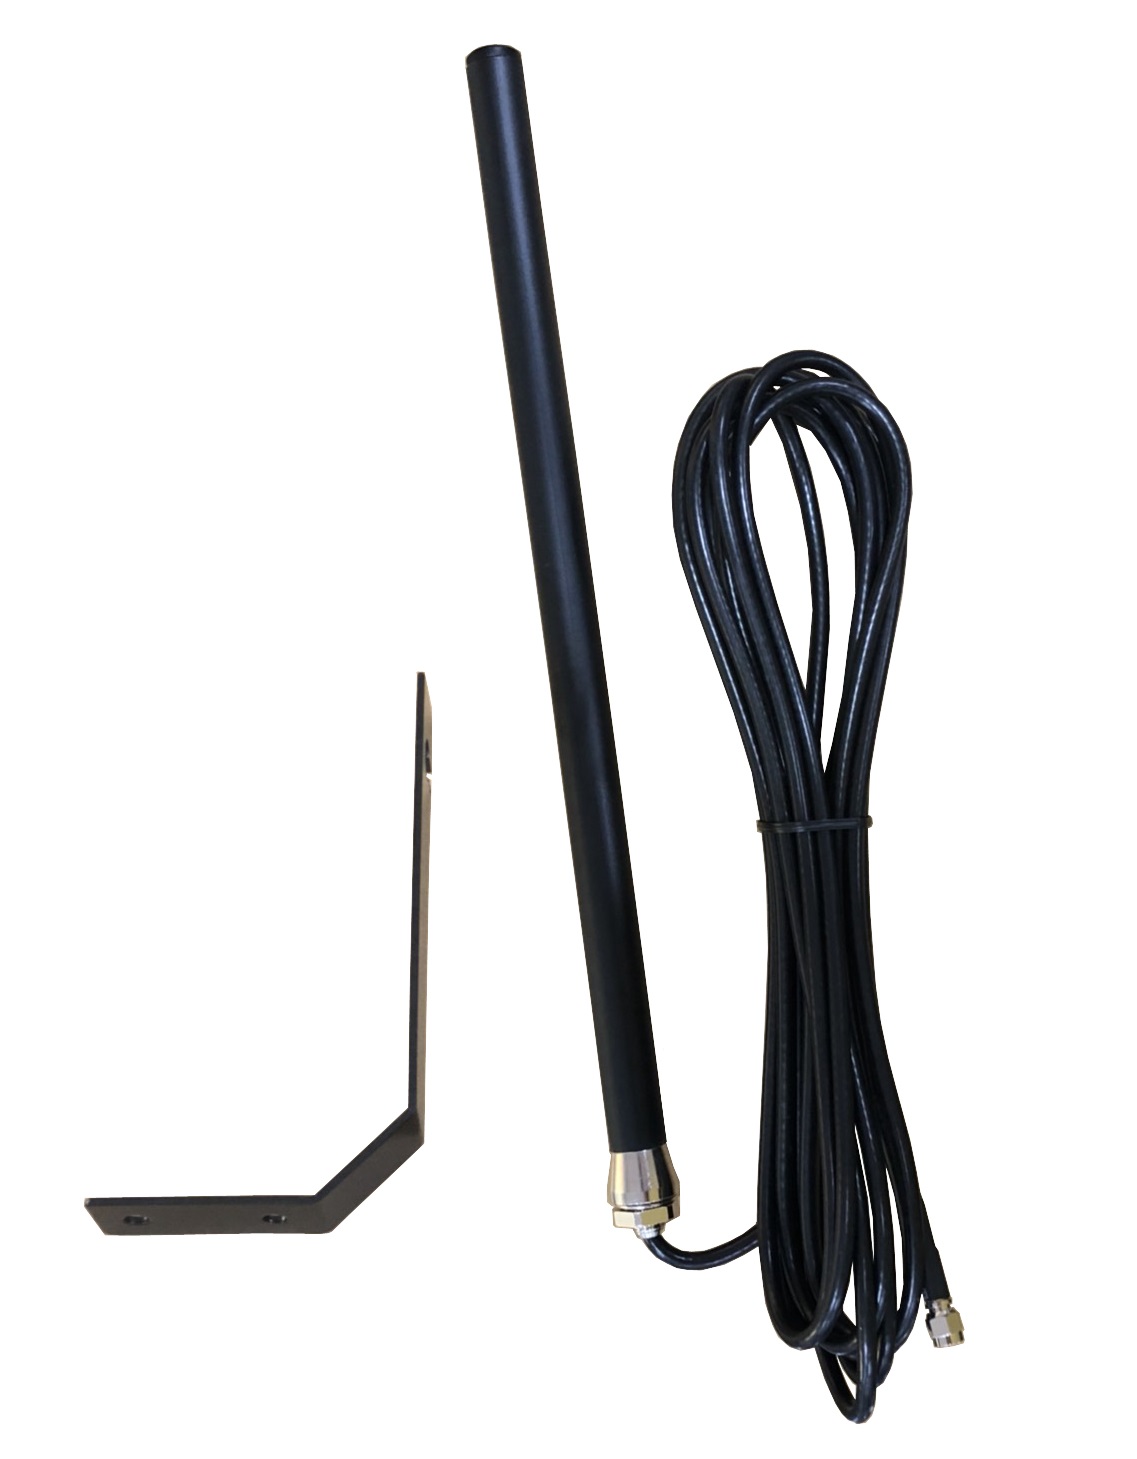 Agricultural / Tractor OMNI Antenna for Car Electronic Accessories made by Chinmore Industry Co., LTD.　竣茂工業有限公司 - MatchSupplier.com